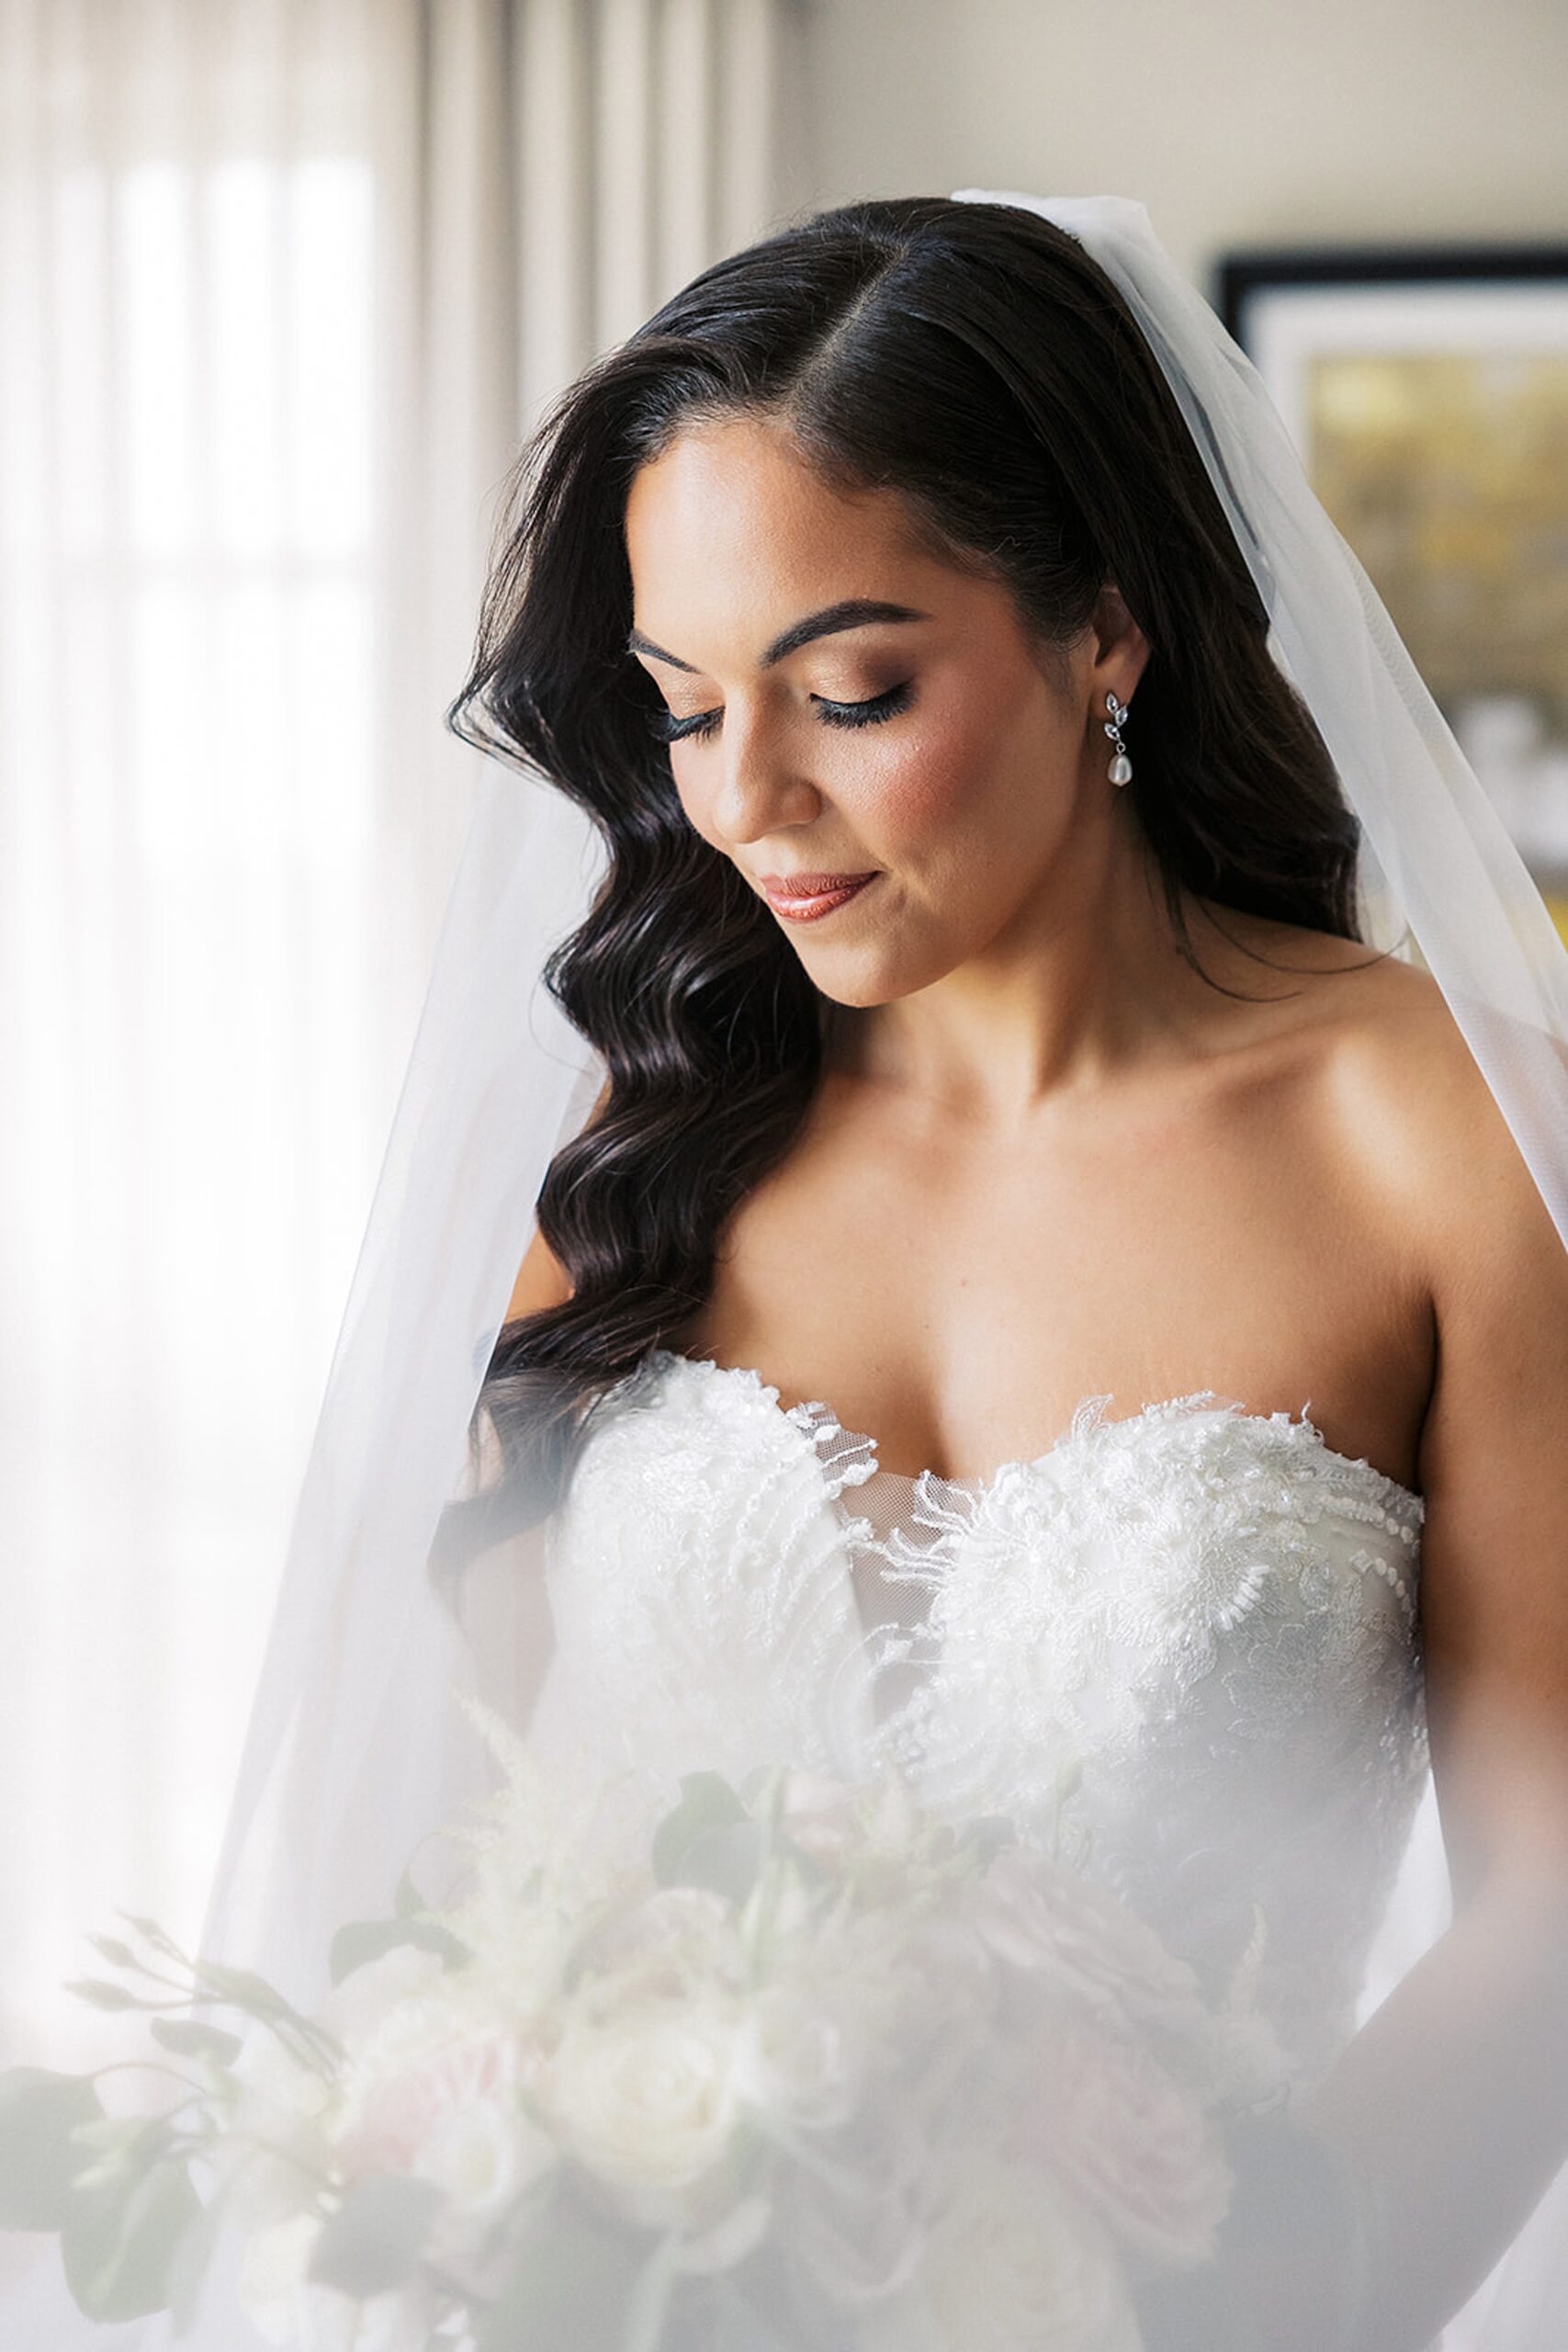 A bride gazes down at her bouquet while getting ready